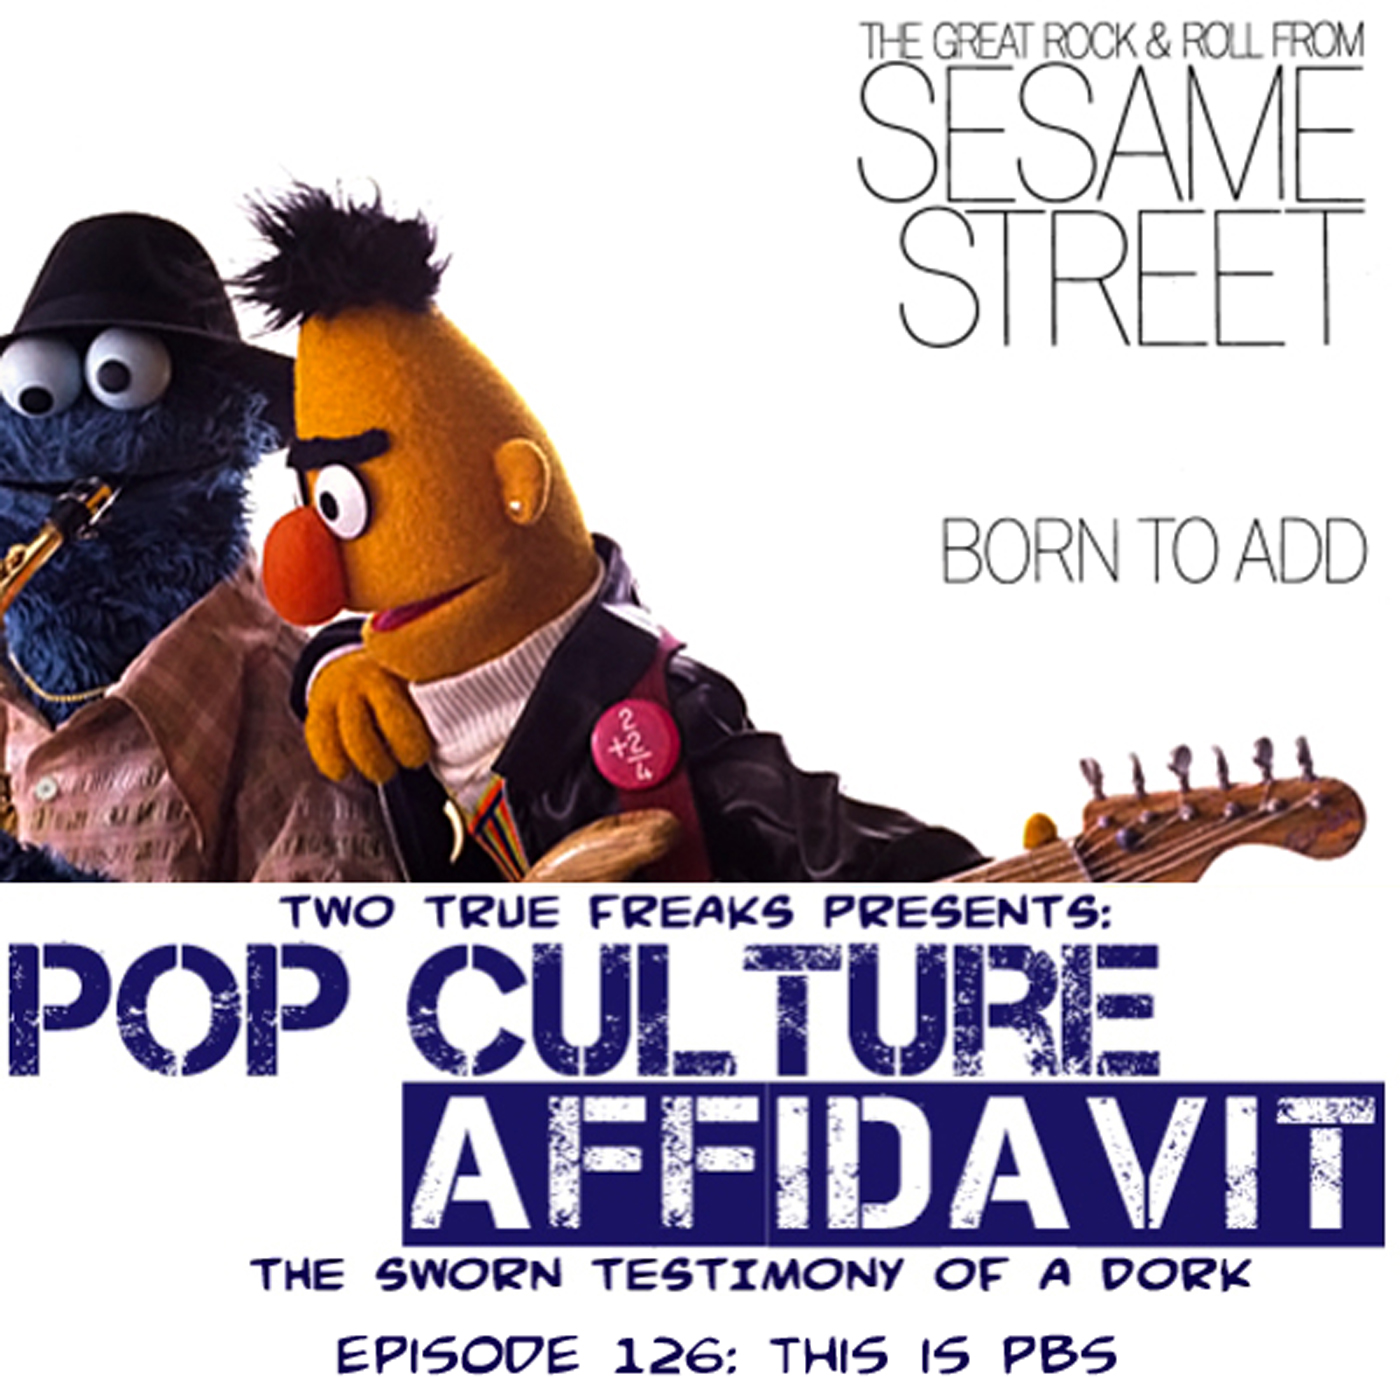 Sesame Street - This craft rocks! Express yourself and